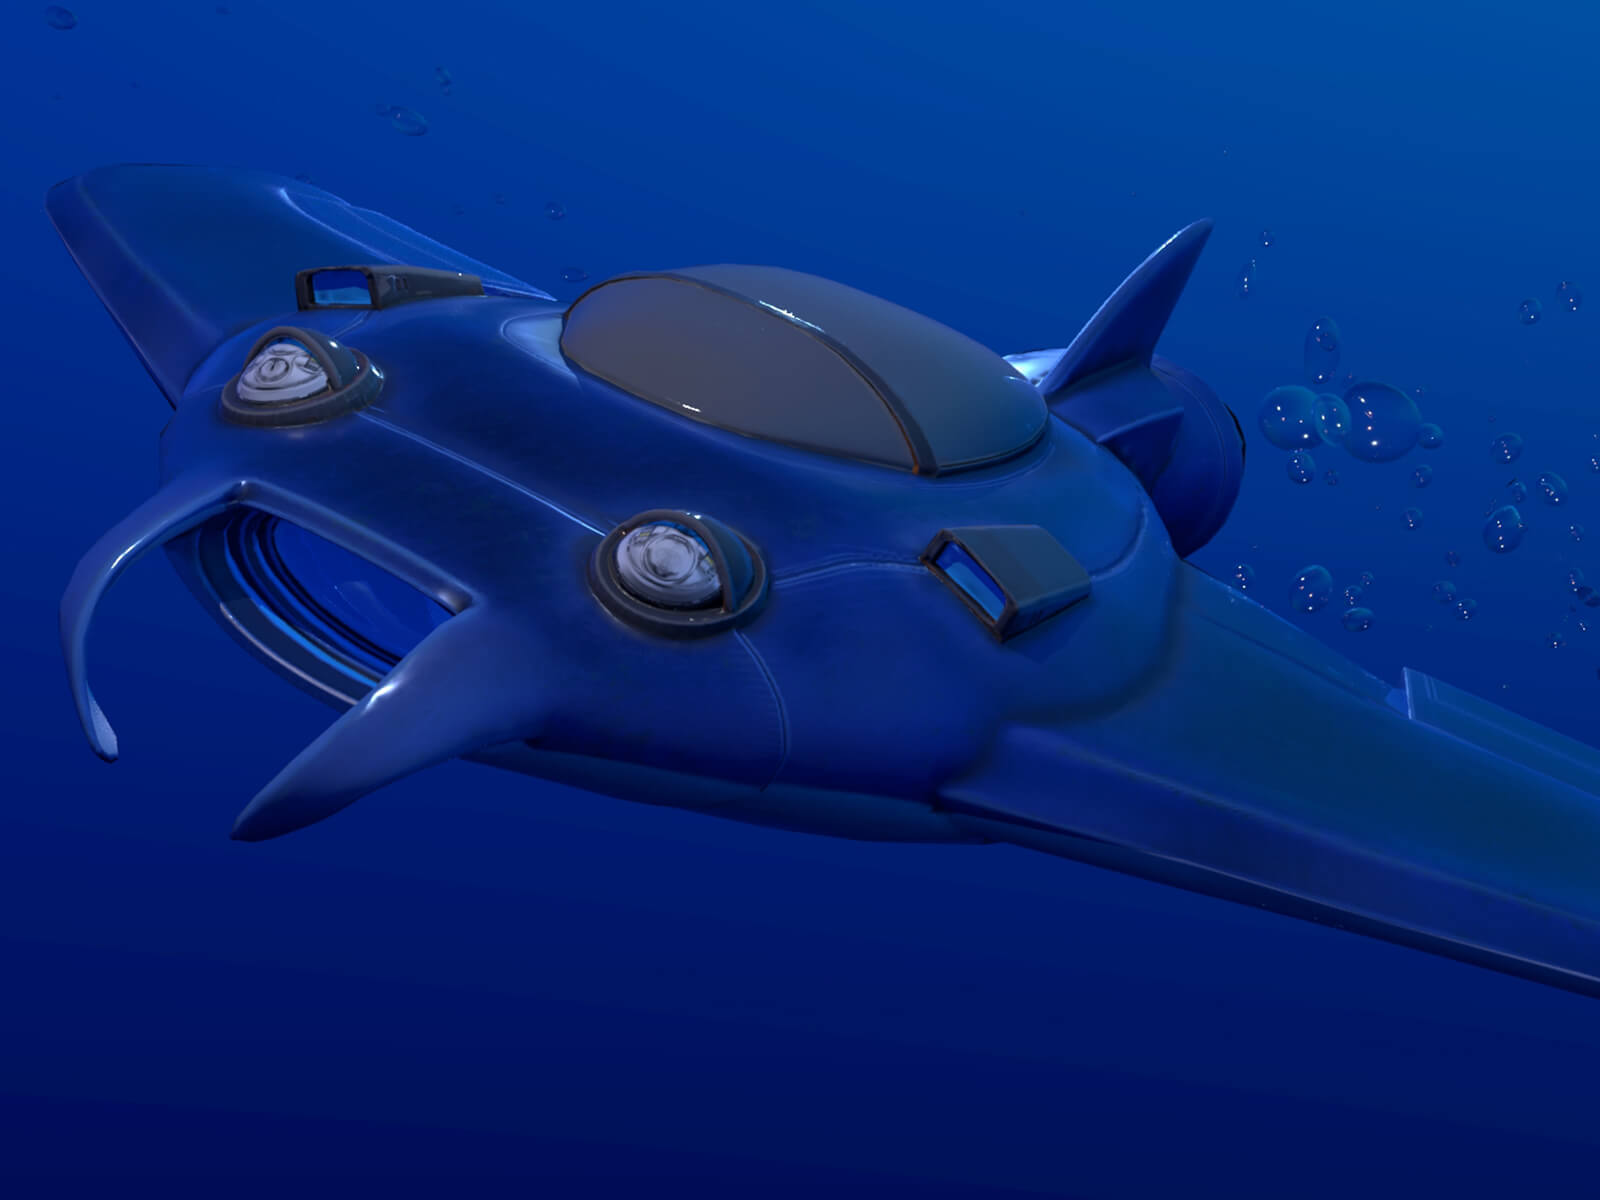 A disc-shaped underwater craft with wings and a fin